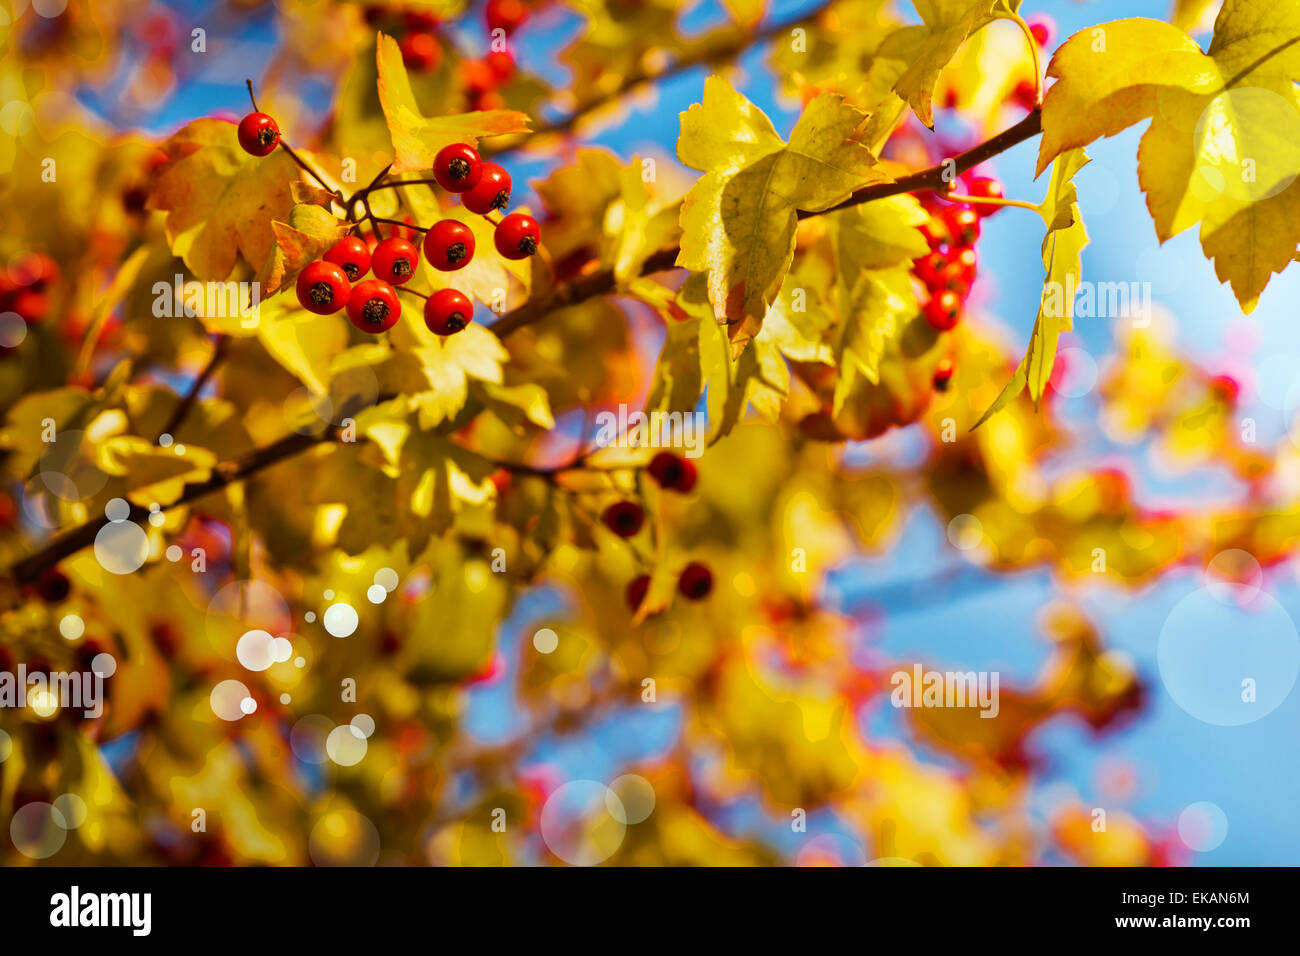 Fall background with yellow leaves, red berries in front of blue sky background, autumn tree Stock Photo